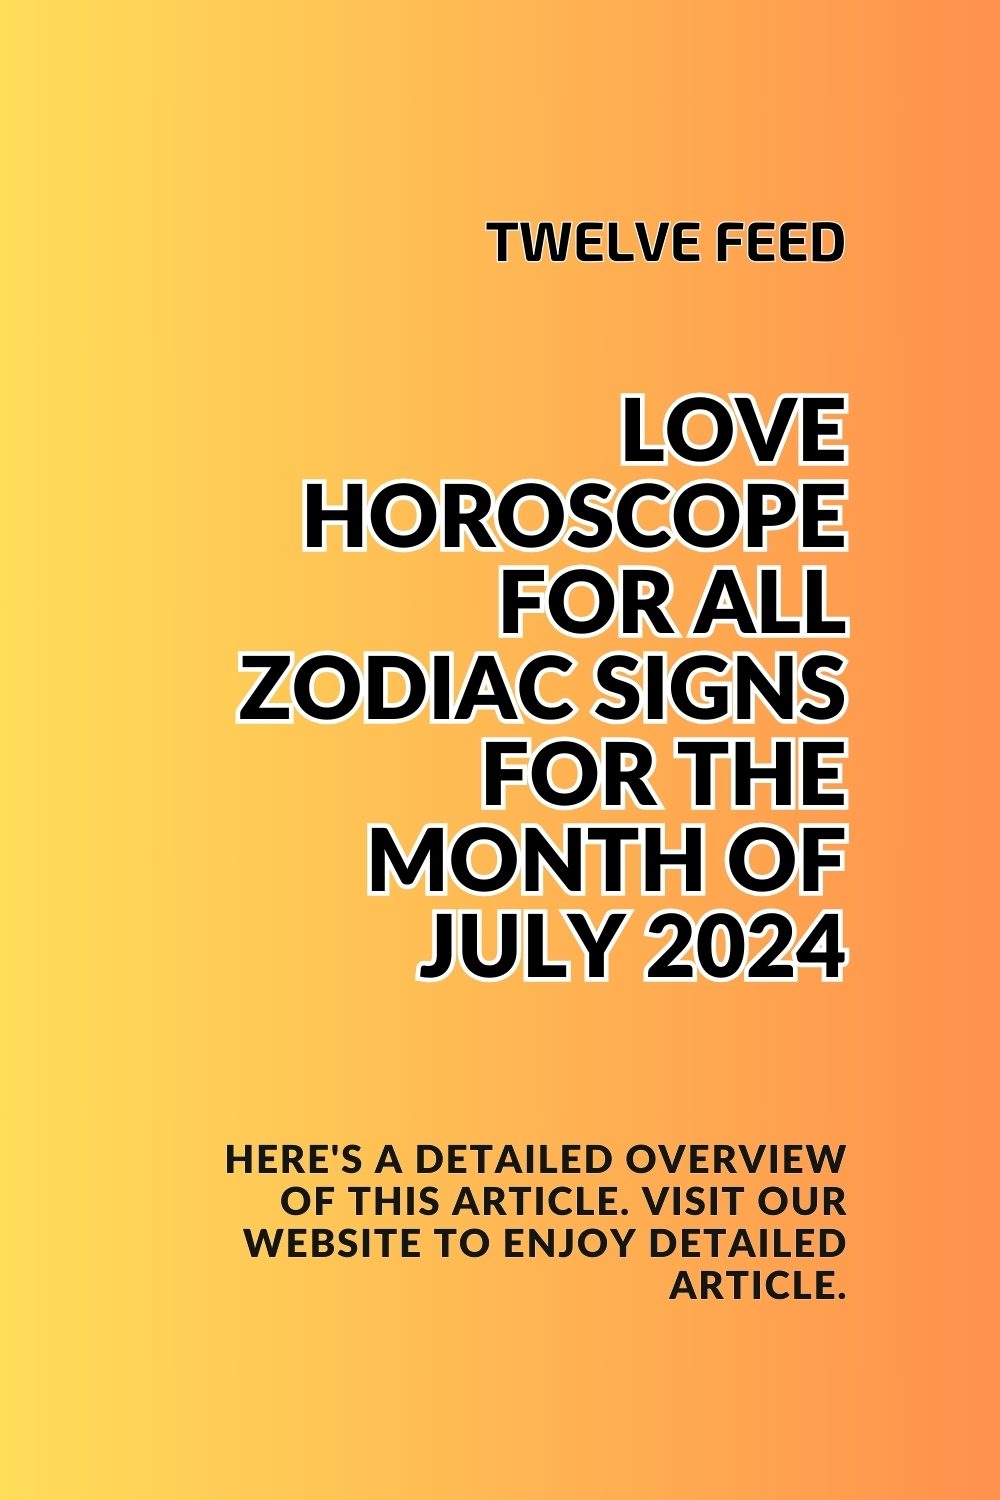 Love Horoscope For All Zodiac Signs For The Month Of July 2024